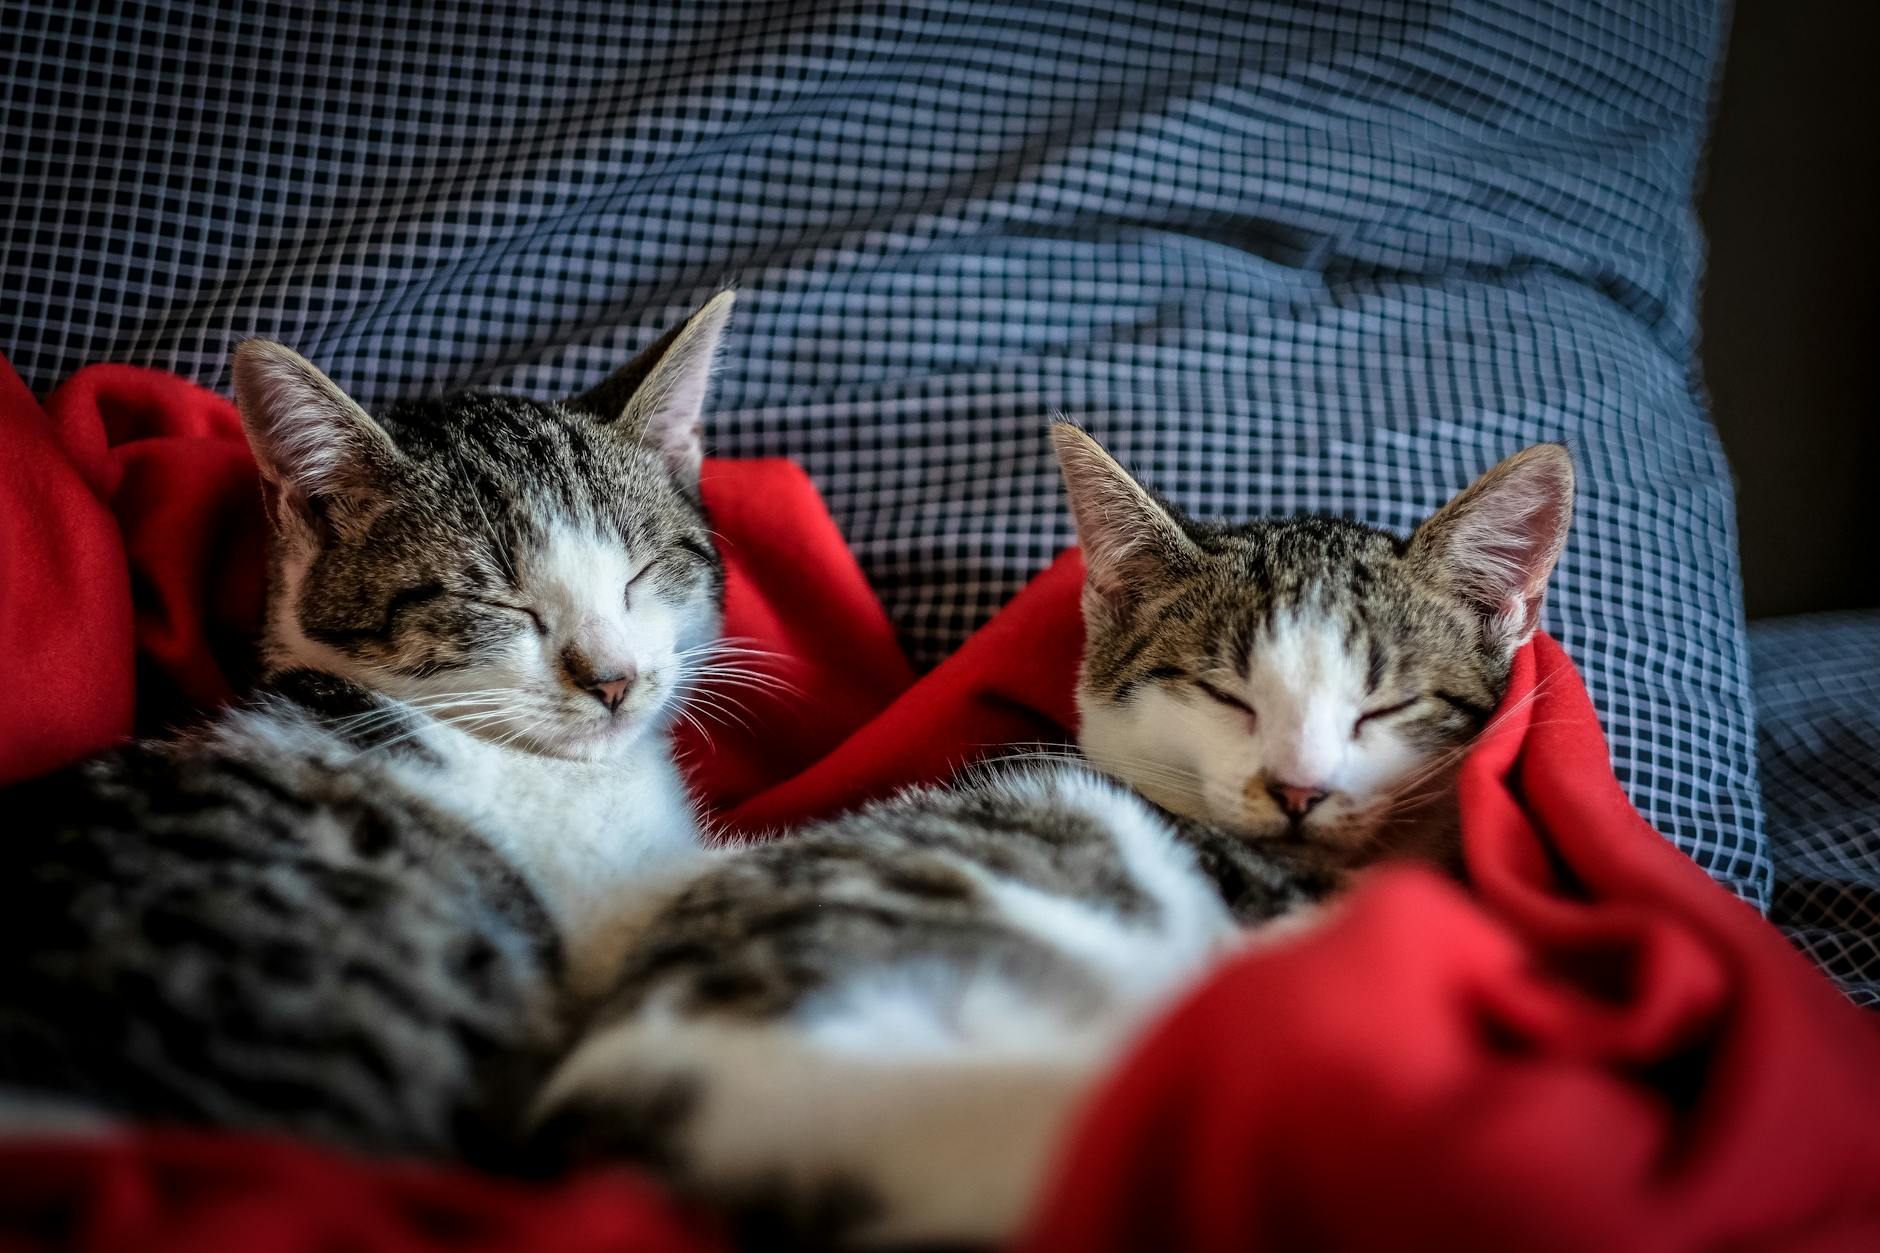 Two cats napping on a red blanket on top of a bunch of cushions. The photo was shot by Francesco Ungaro.